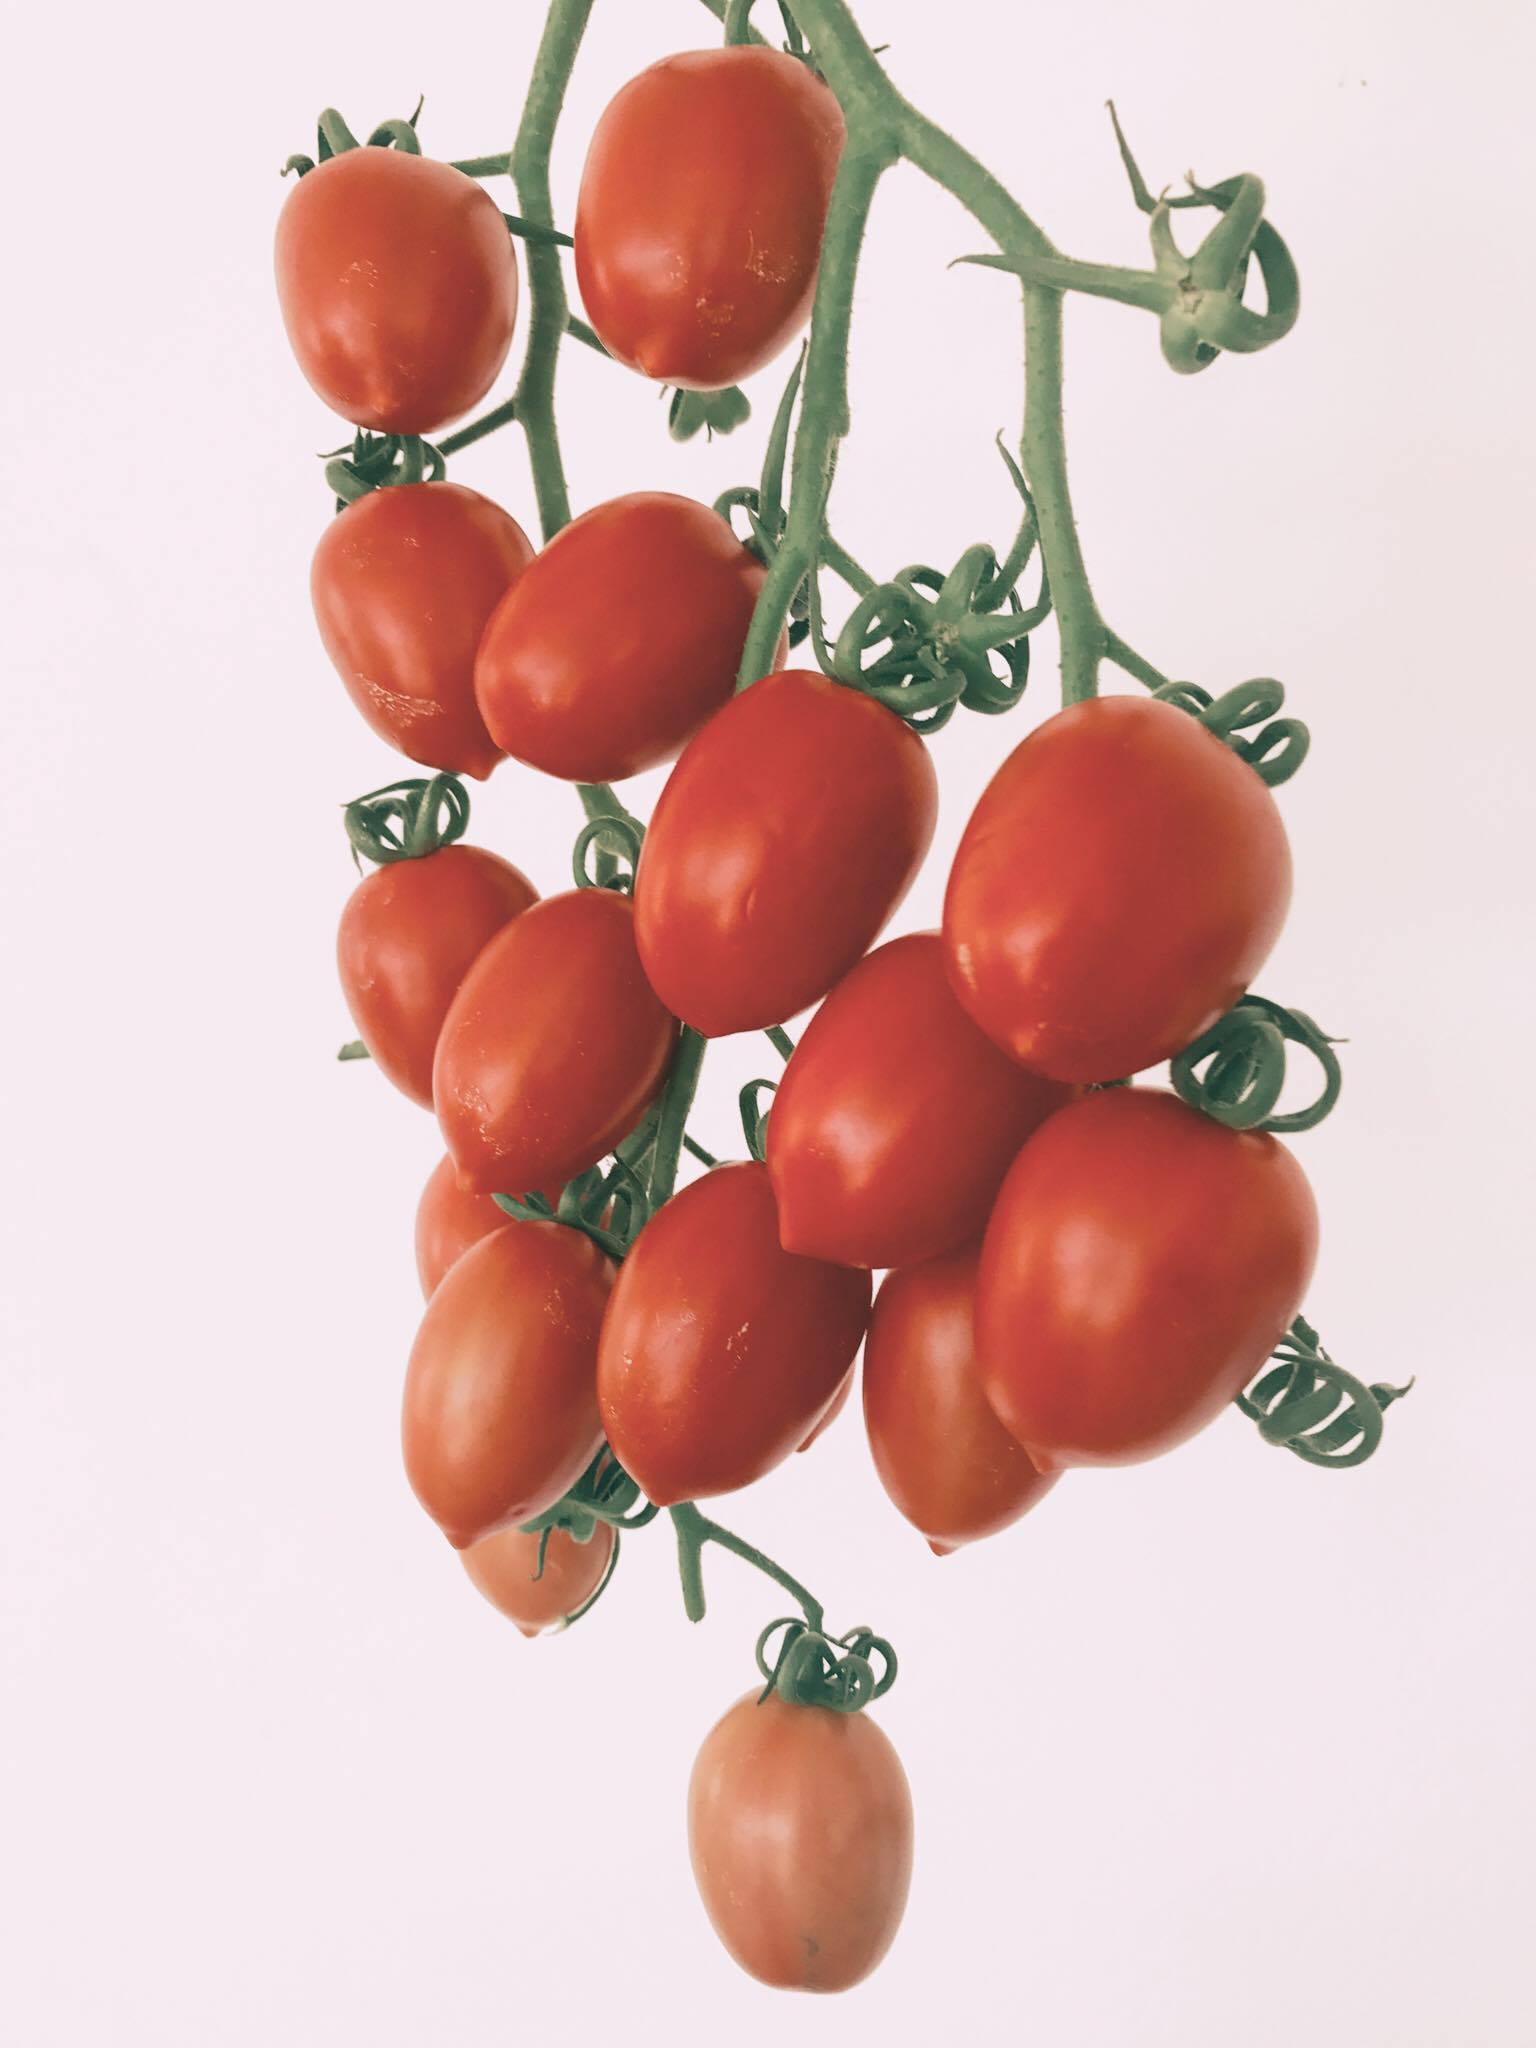 Plum cherry tomato from our client!